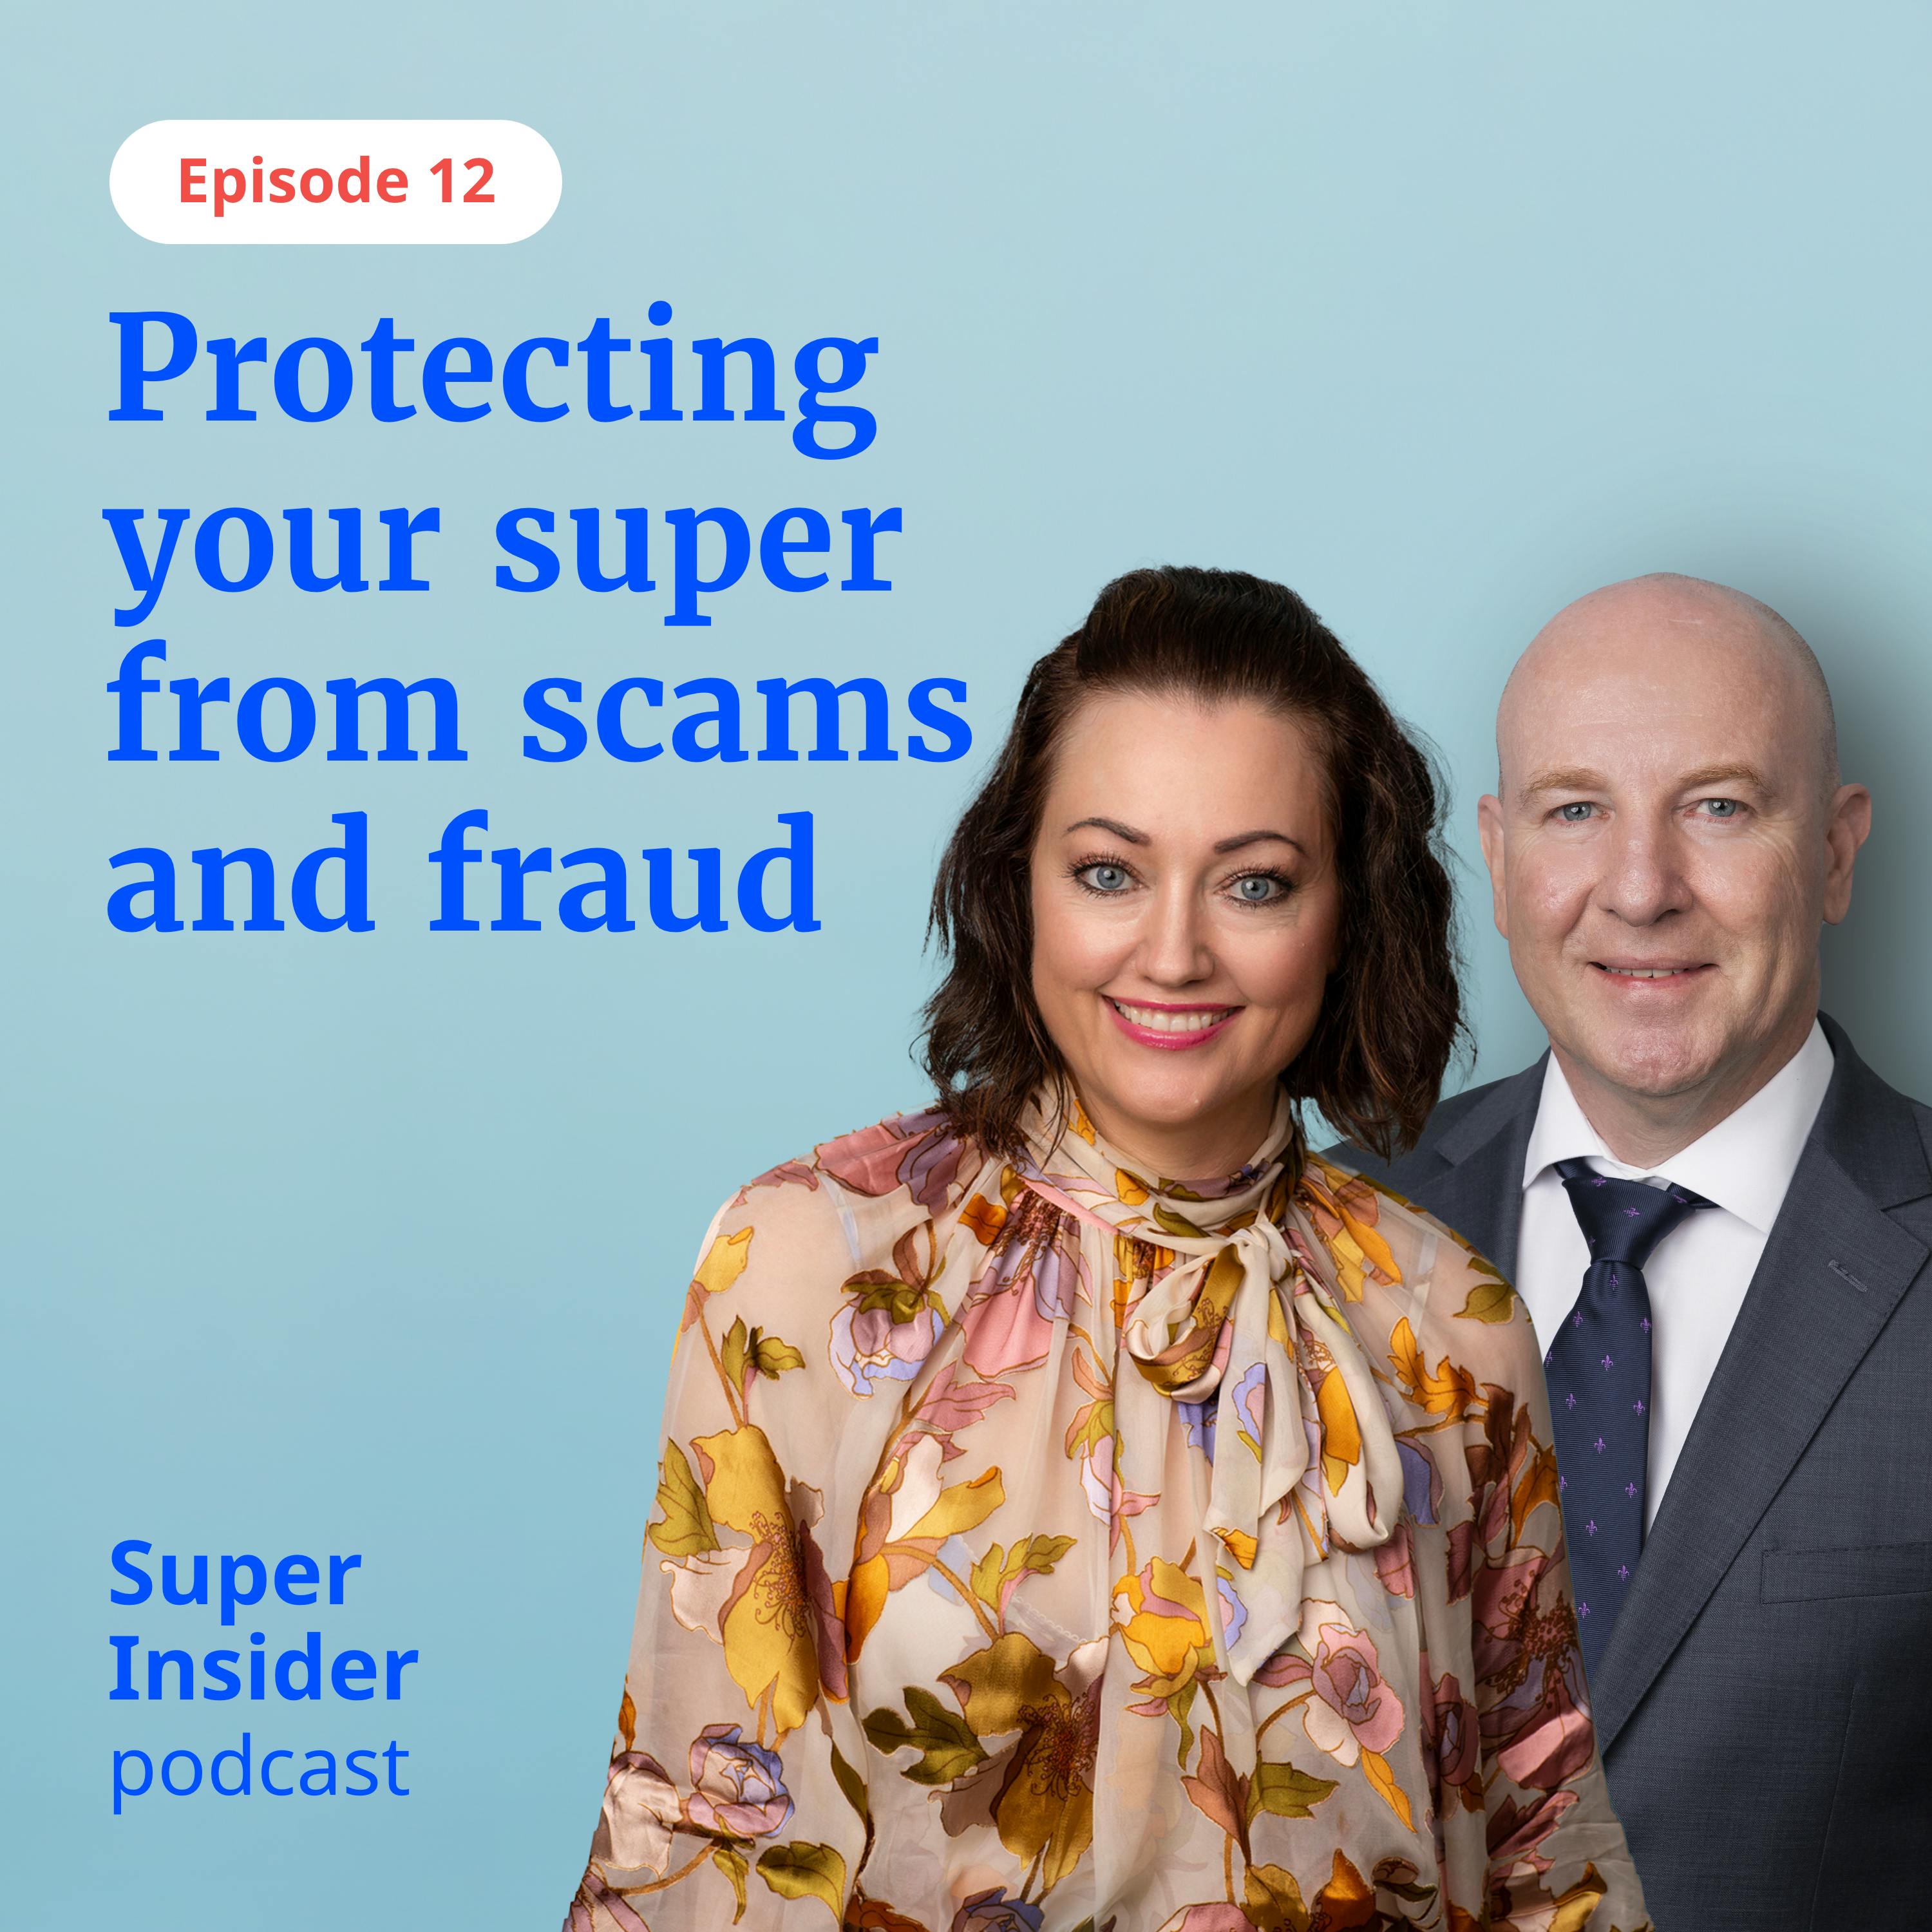 Protecting your super from scams and fraud